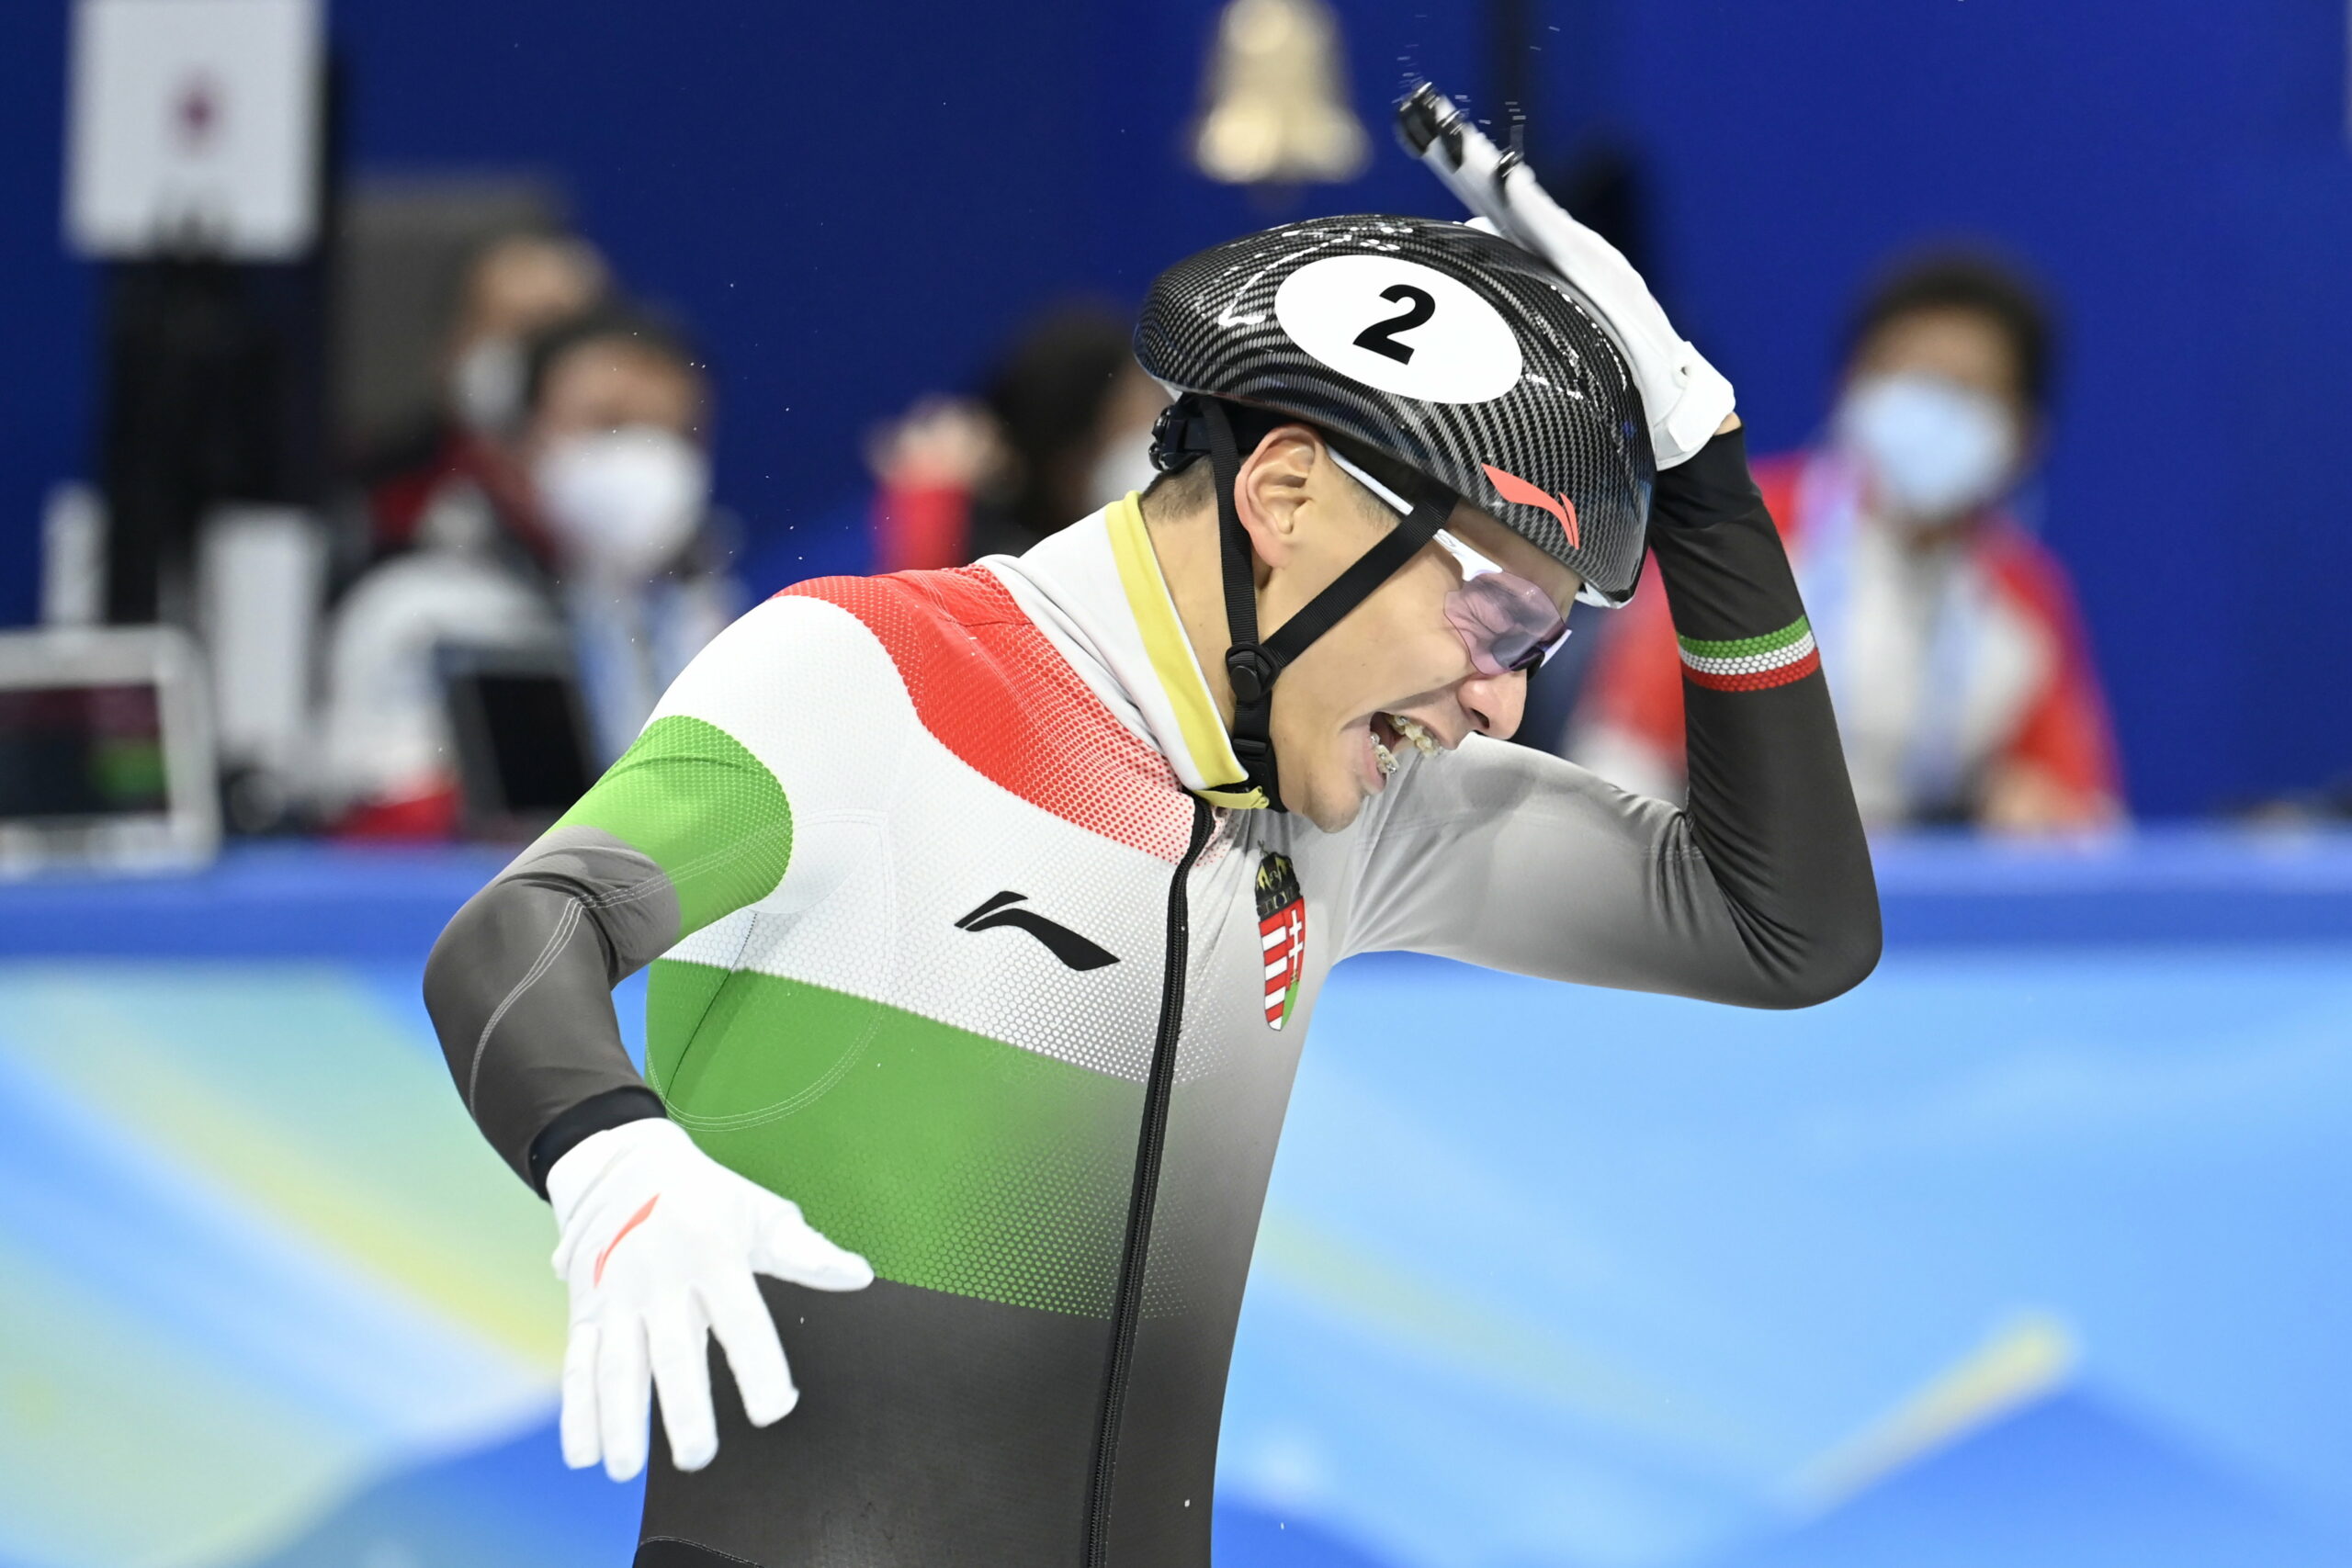 Lost Gold Medal in Short Track Speed Skating: Hungary’s Appeal Rejected